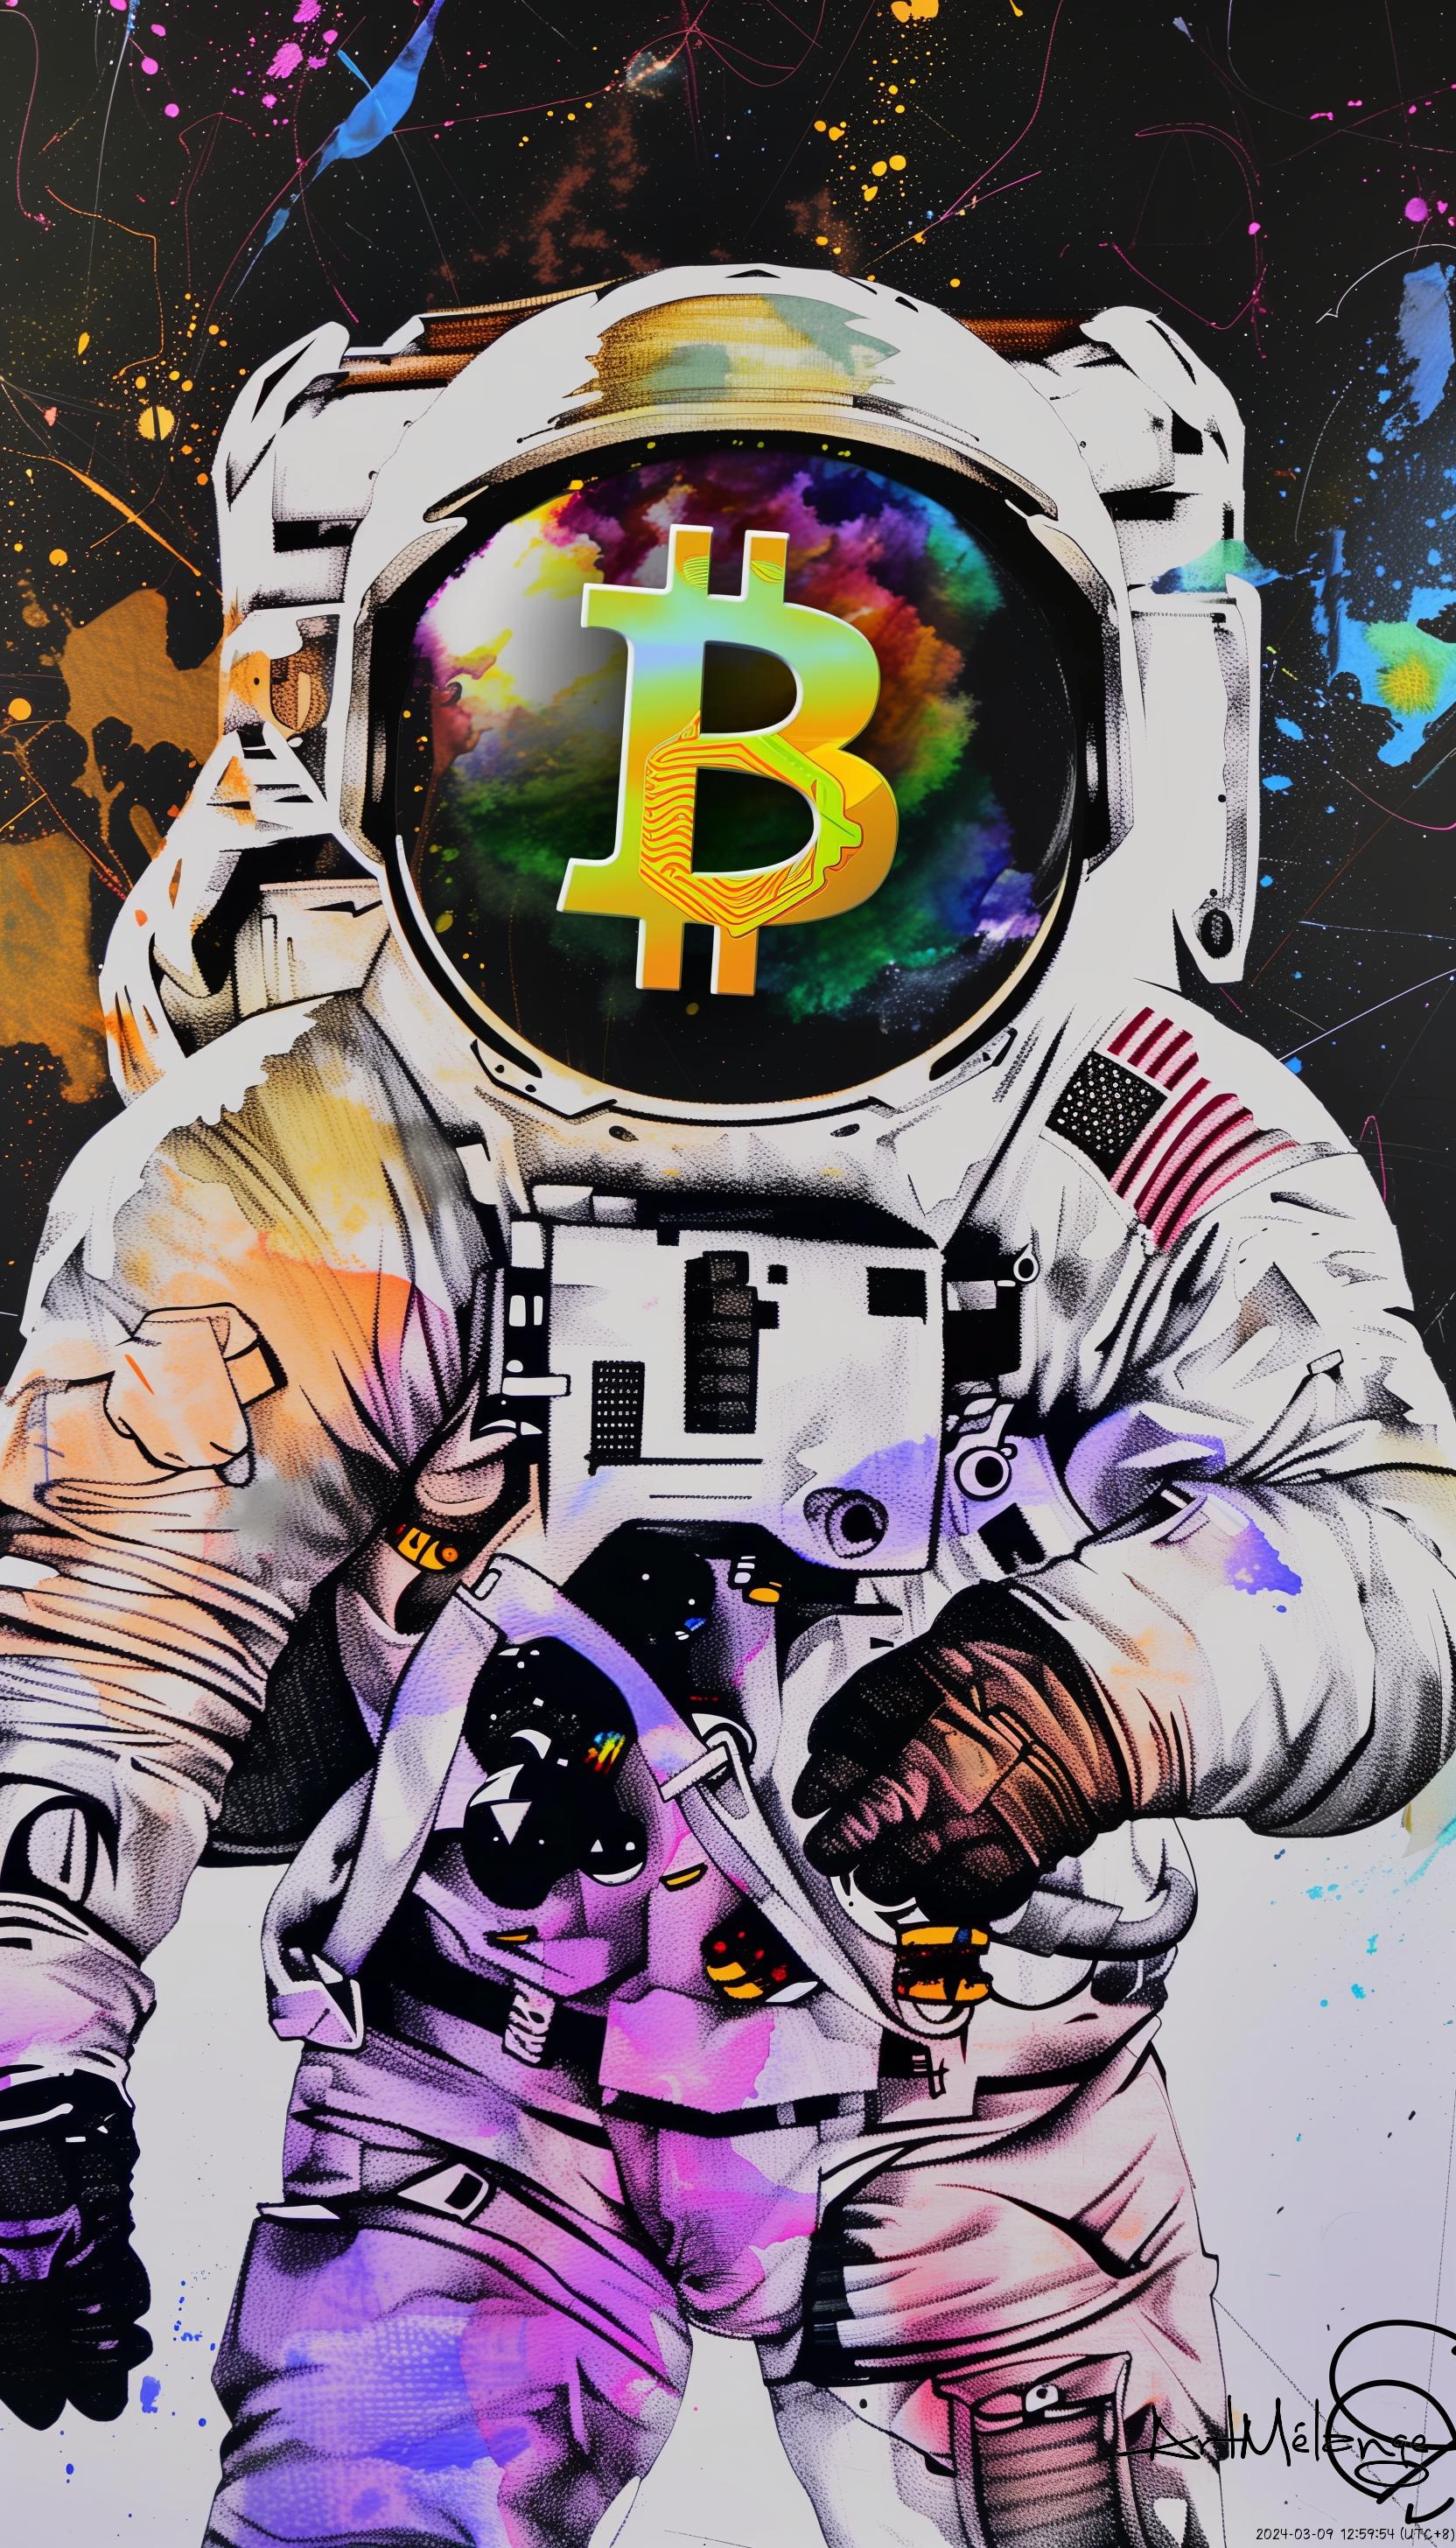 The Astral Miner: Prospecting the Bitcoin Nebula